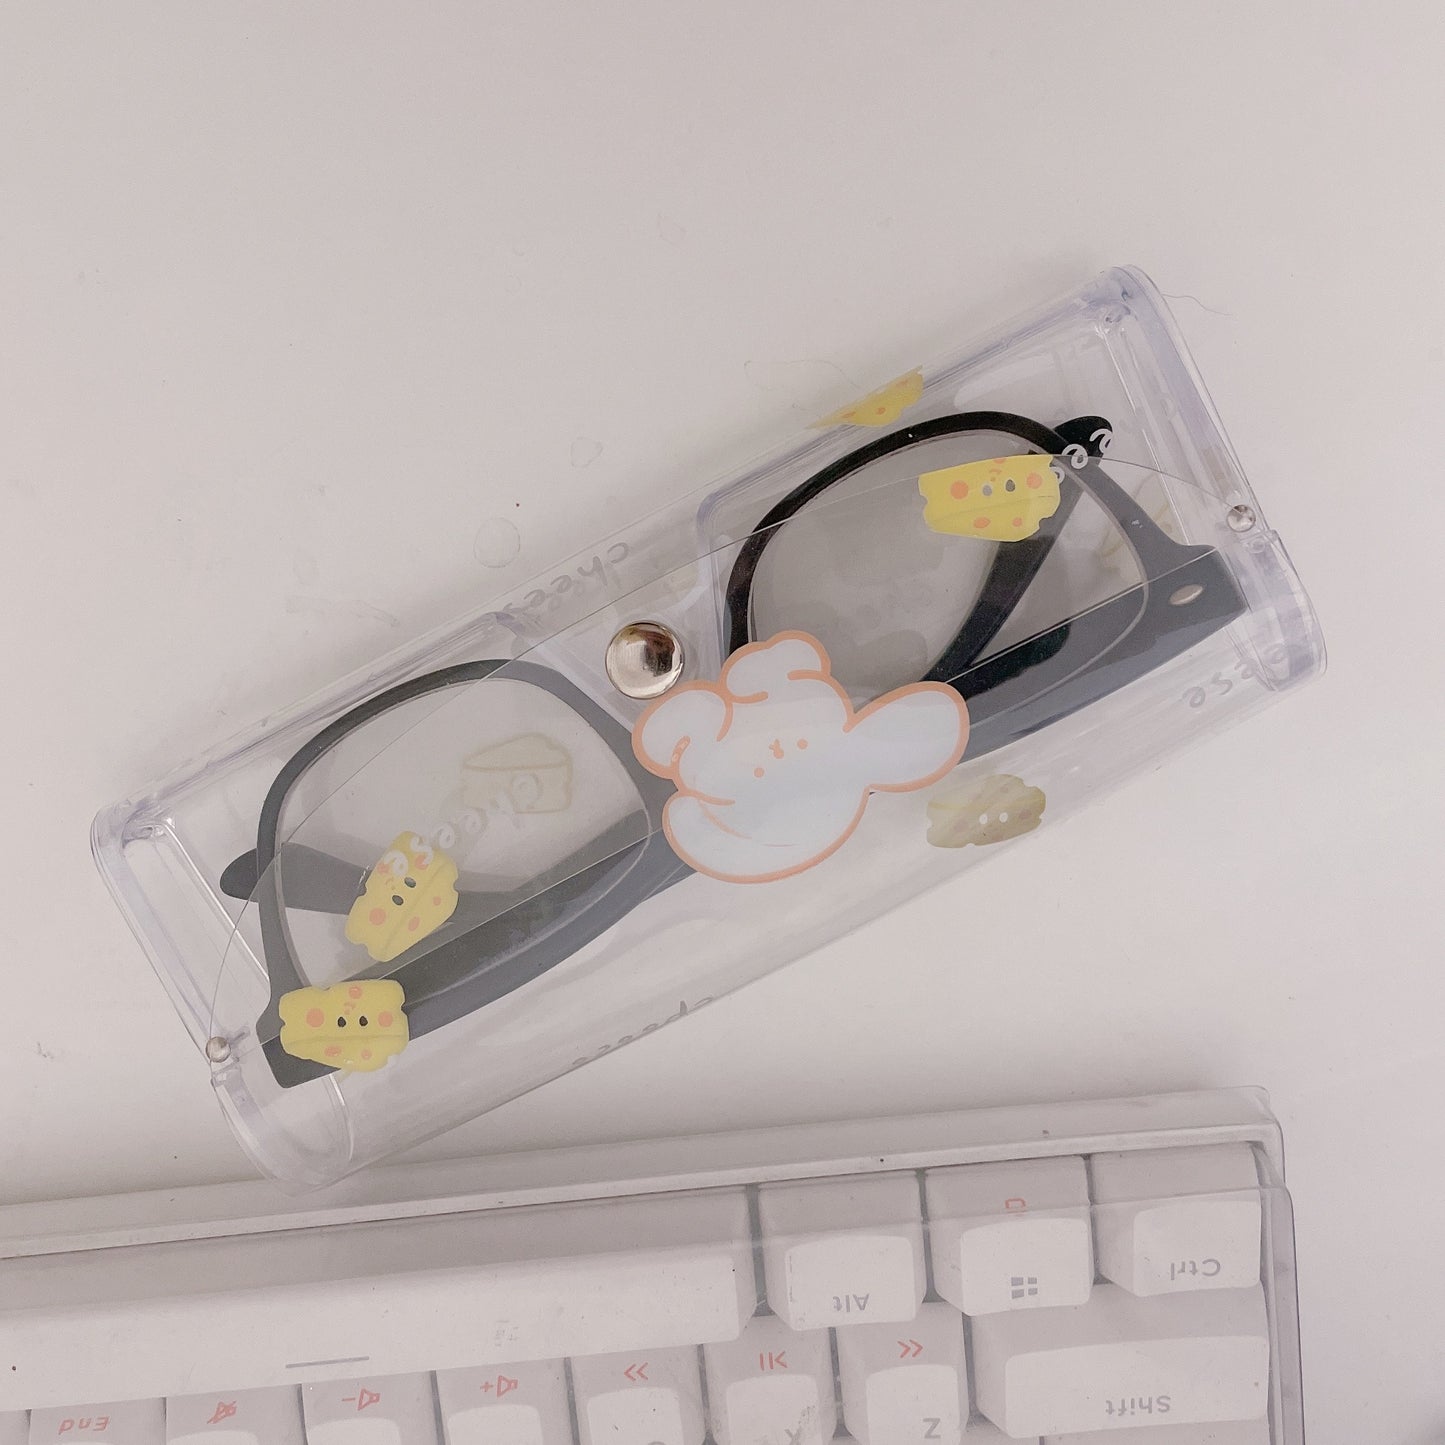 Kawaii Spectacle Case